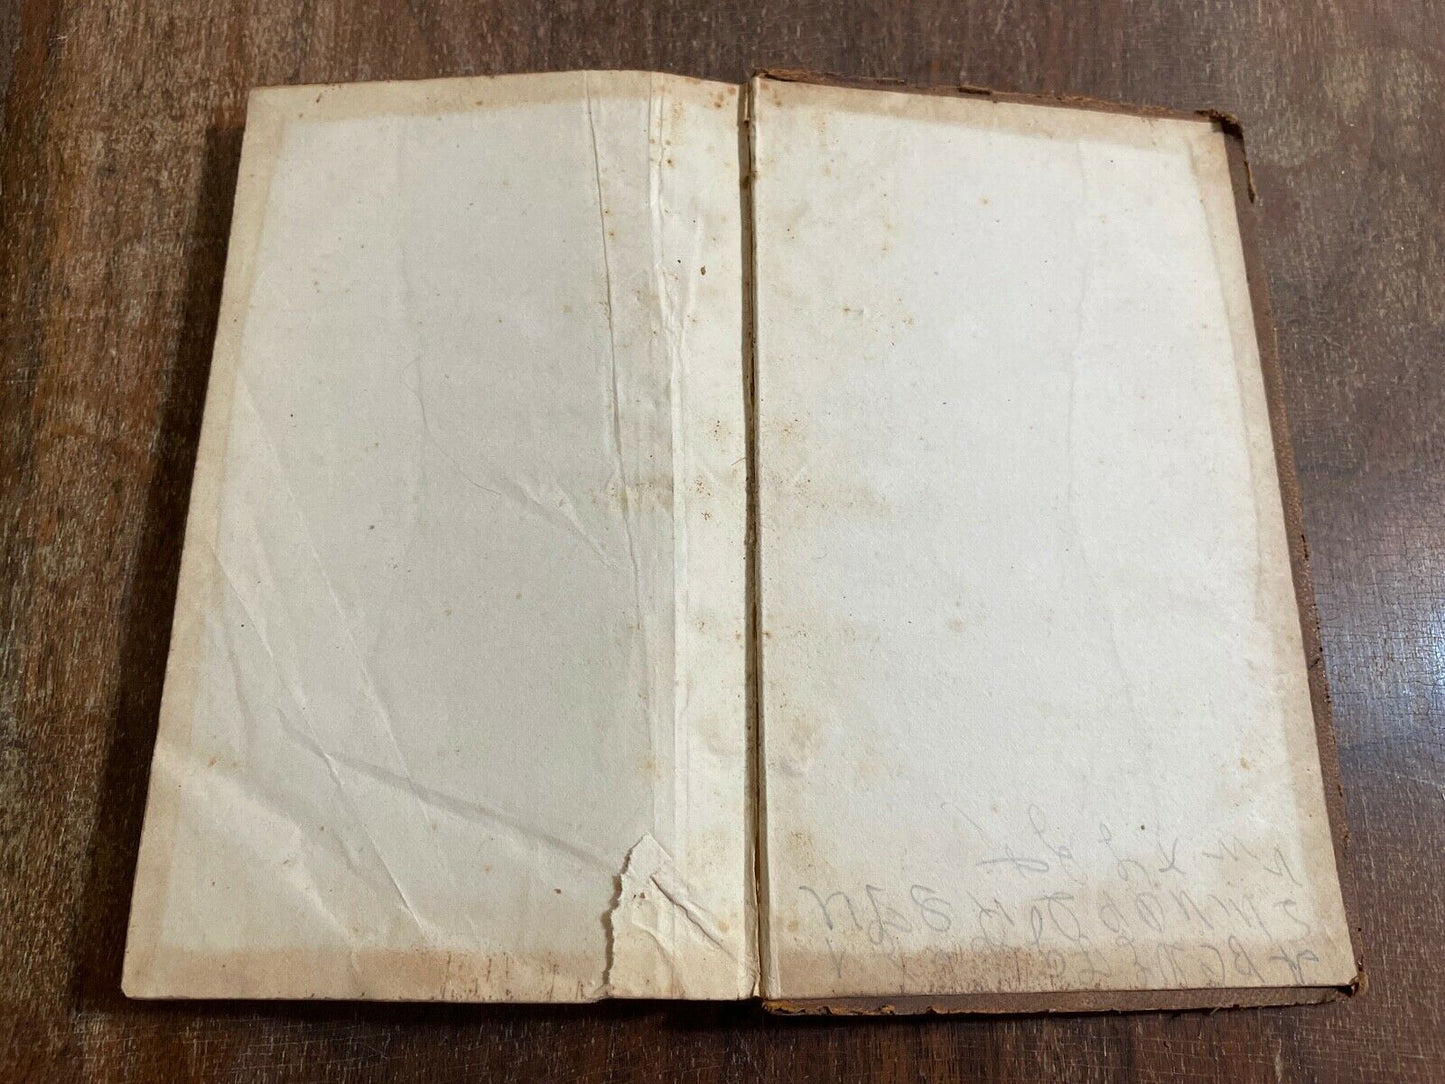 Society For Promoting Christian Knowledge, Abridgment of New Testament, 1800s 2b